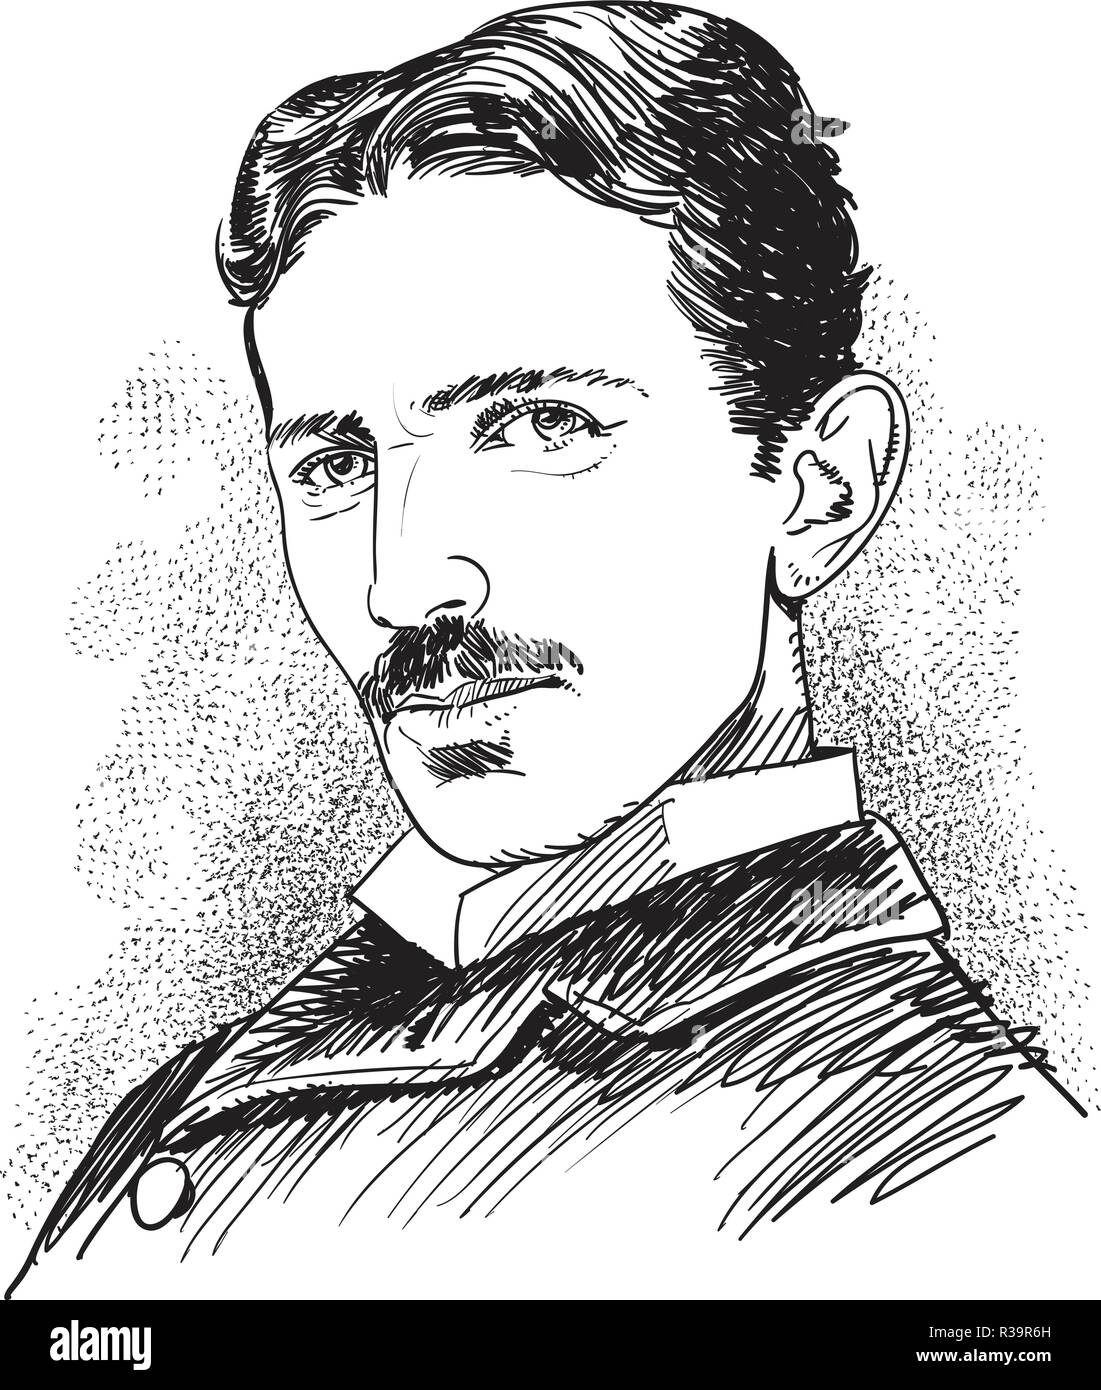 nicola tesla famous scientist illustration in line art tesla was a serbian american inventor electrical and mechanical engineer R39R6H